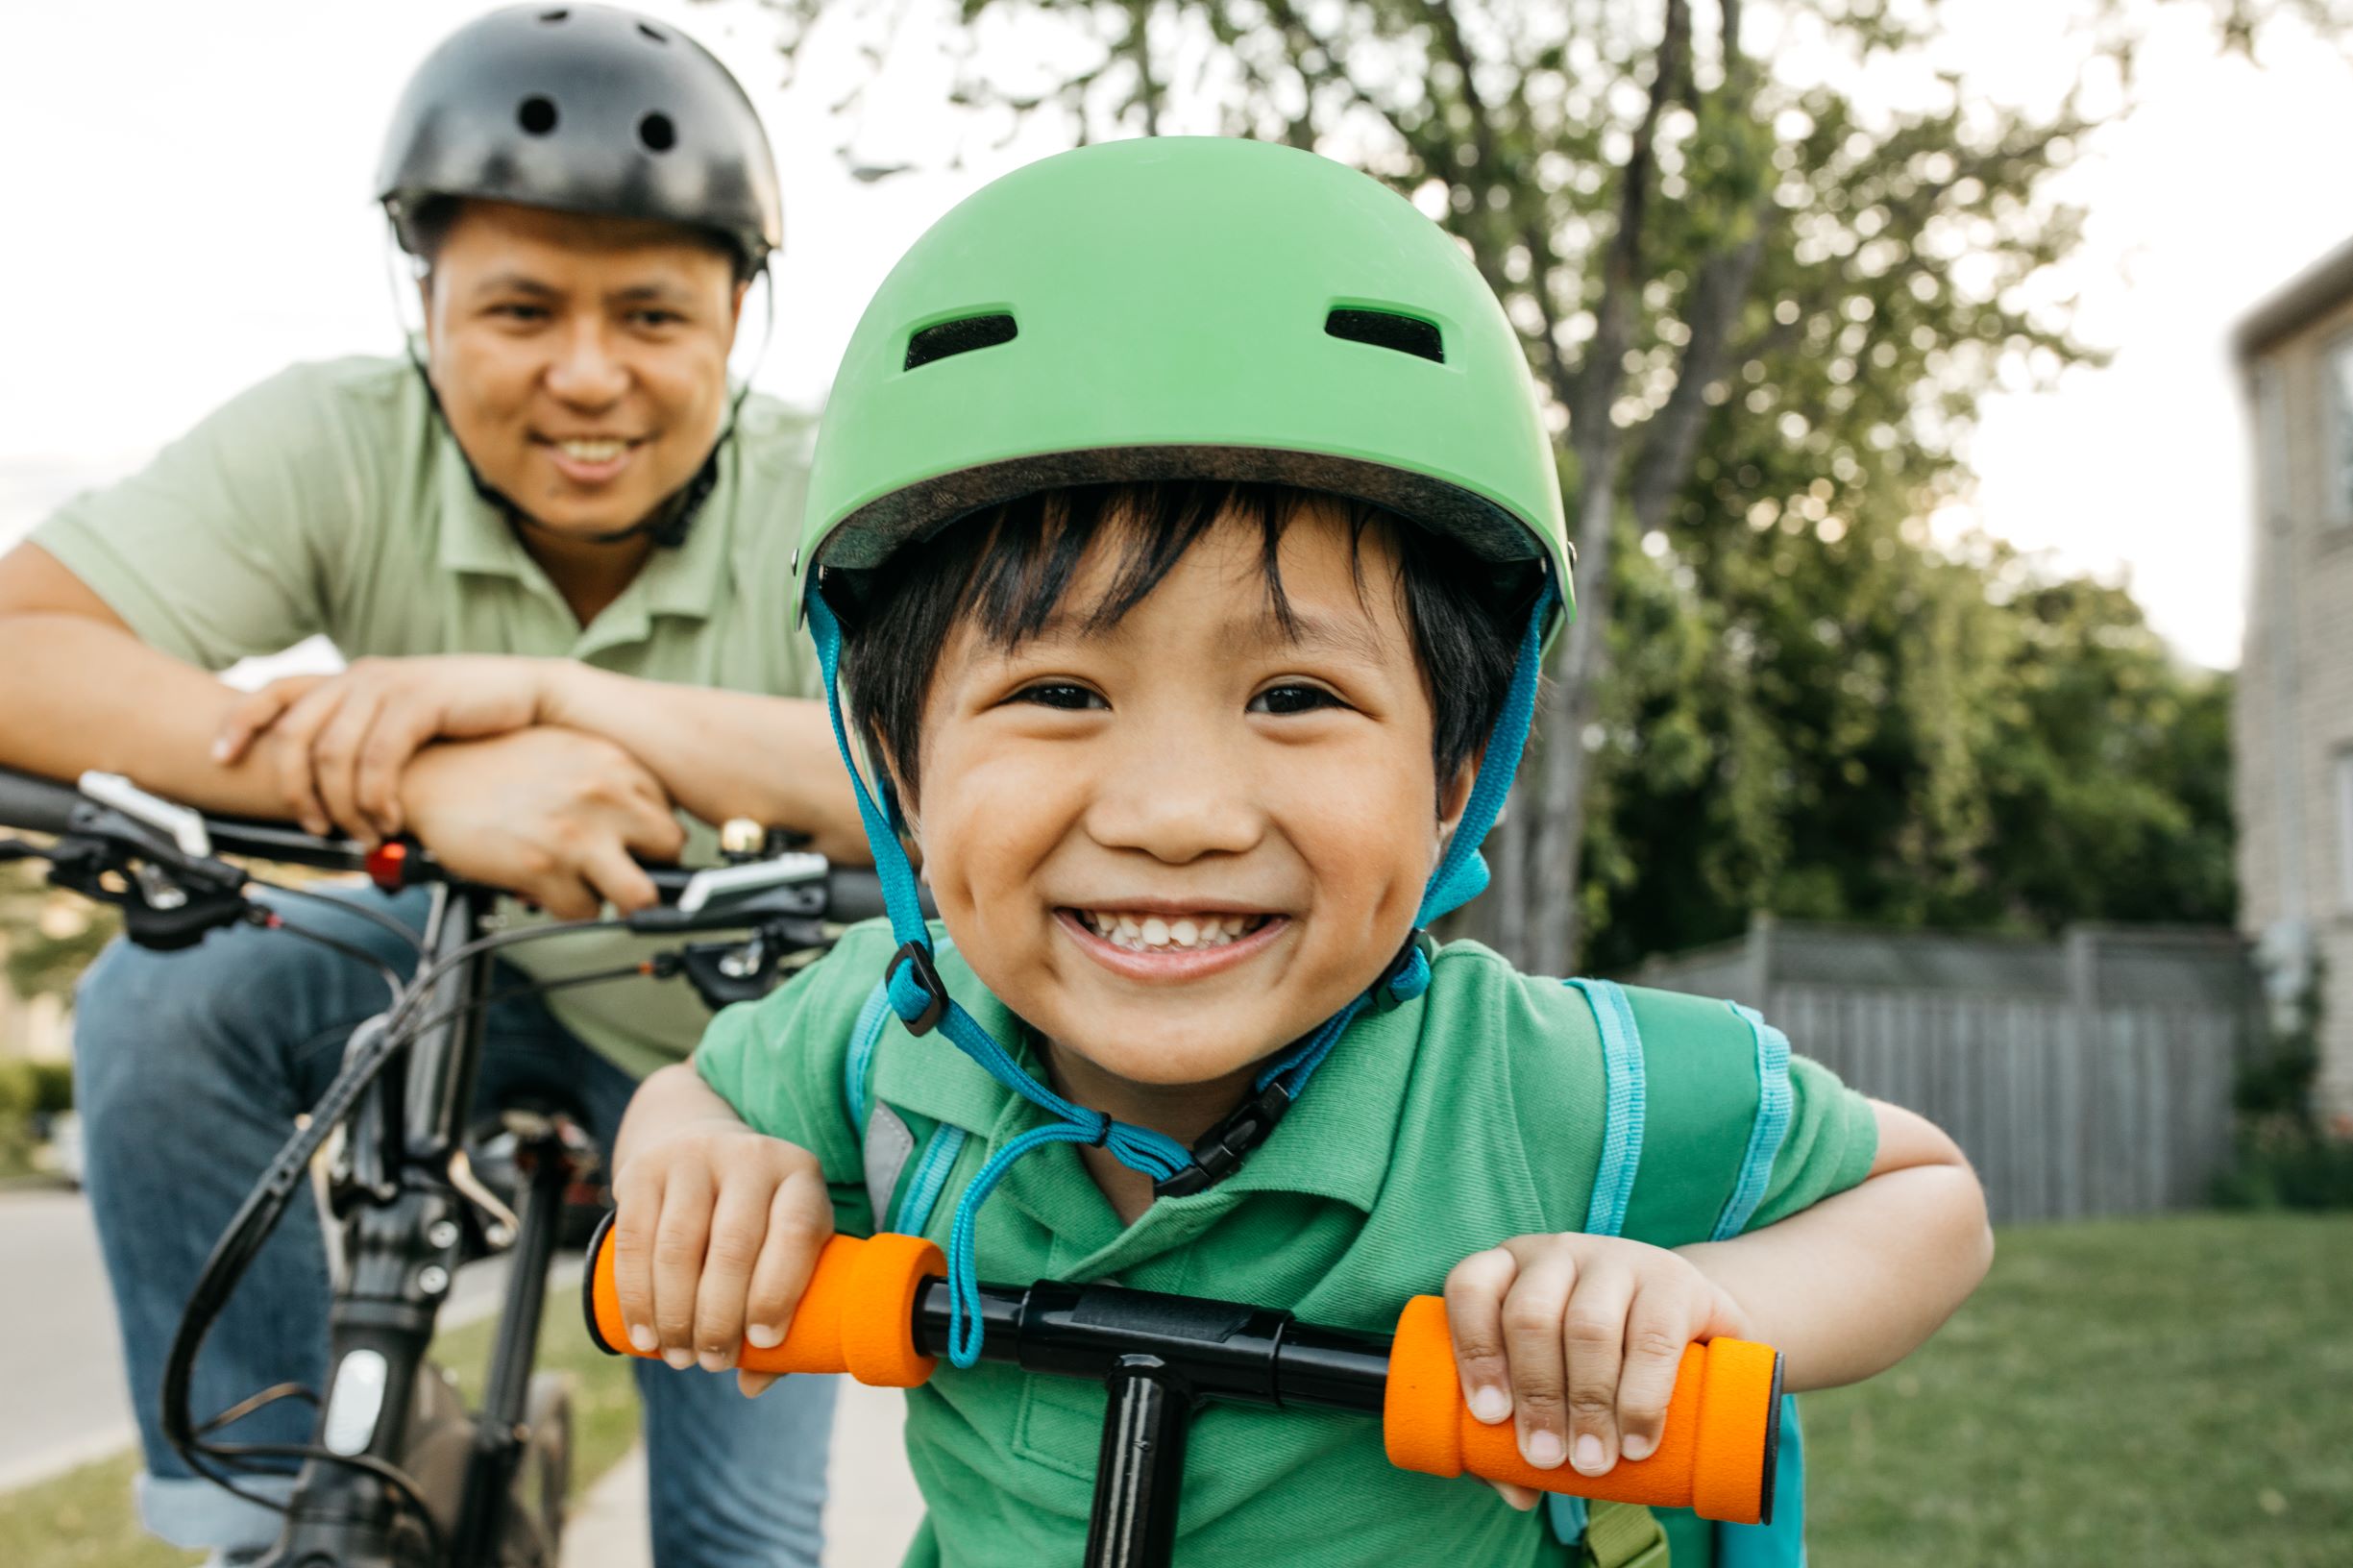 a child riding a bike grins happily at the camera